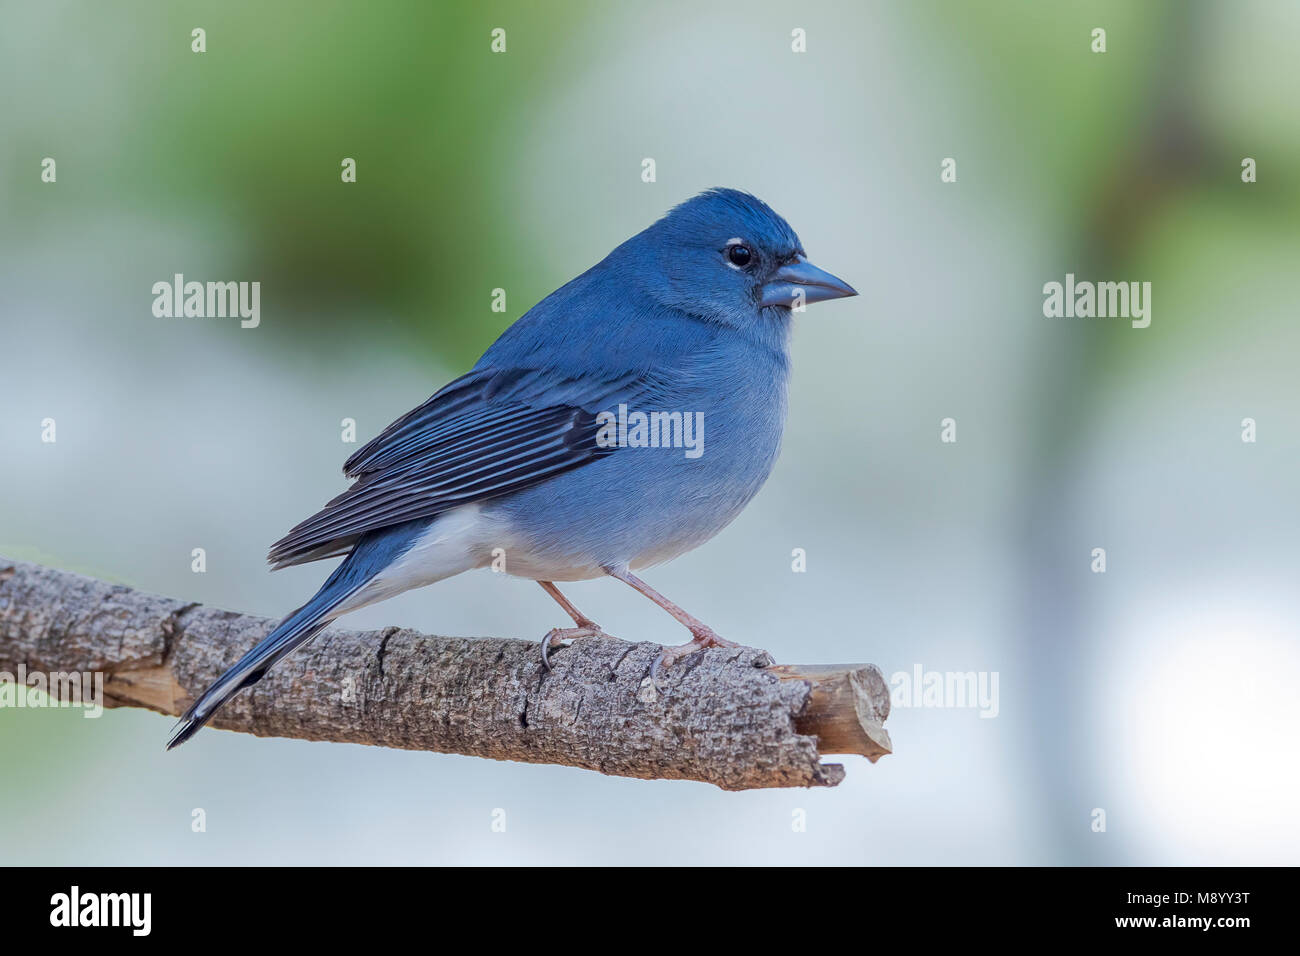 Blue Chaffinch at Merendero De Chio picnic area near Teyde, Tenerife, Canary Islands Stock Photo